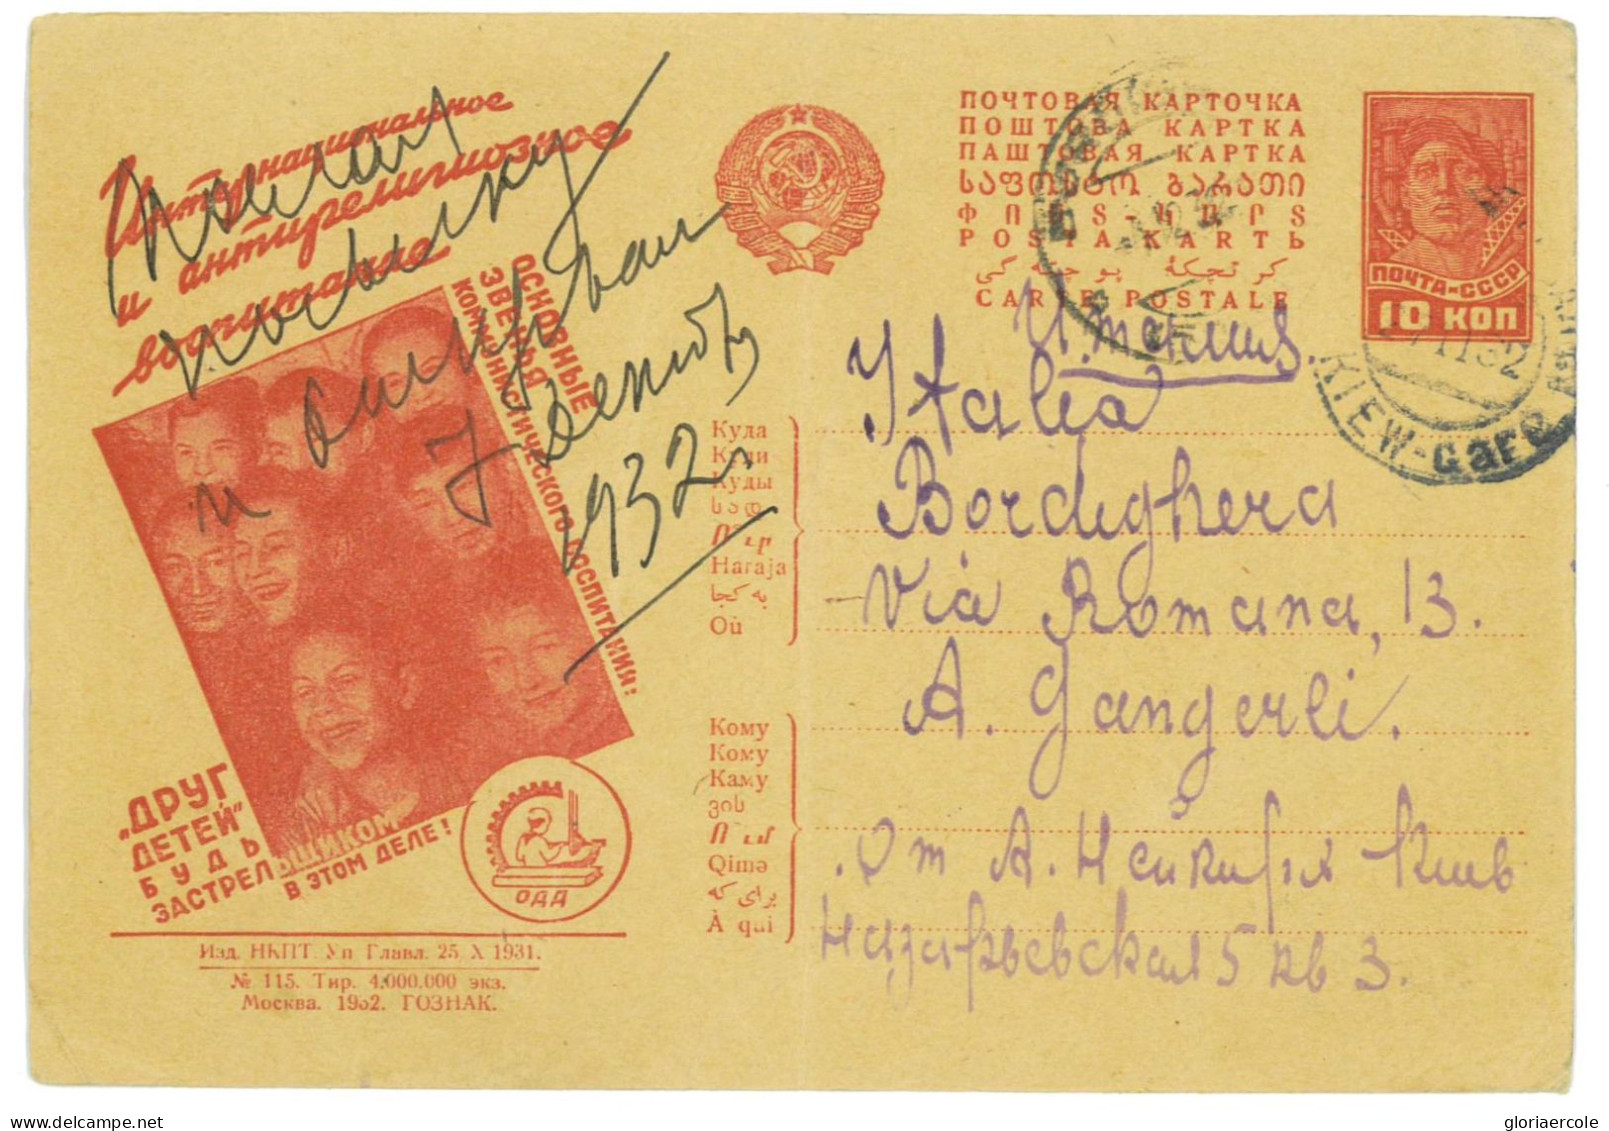 P2920 - RUSSIA , STATIONERY POST CARD MICHEL P127 /115 USED TO ITALY, 1932 - Cartas & Documentos